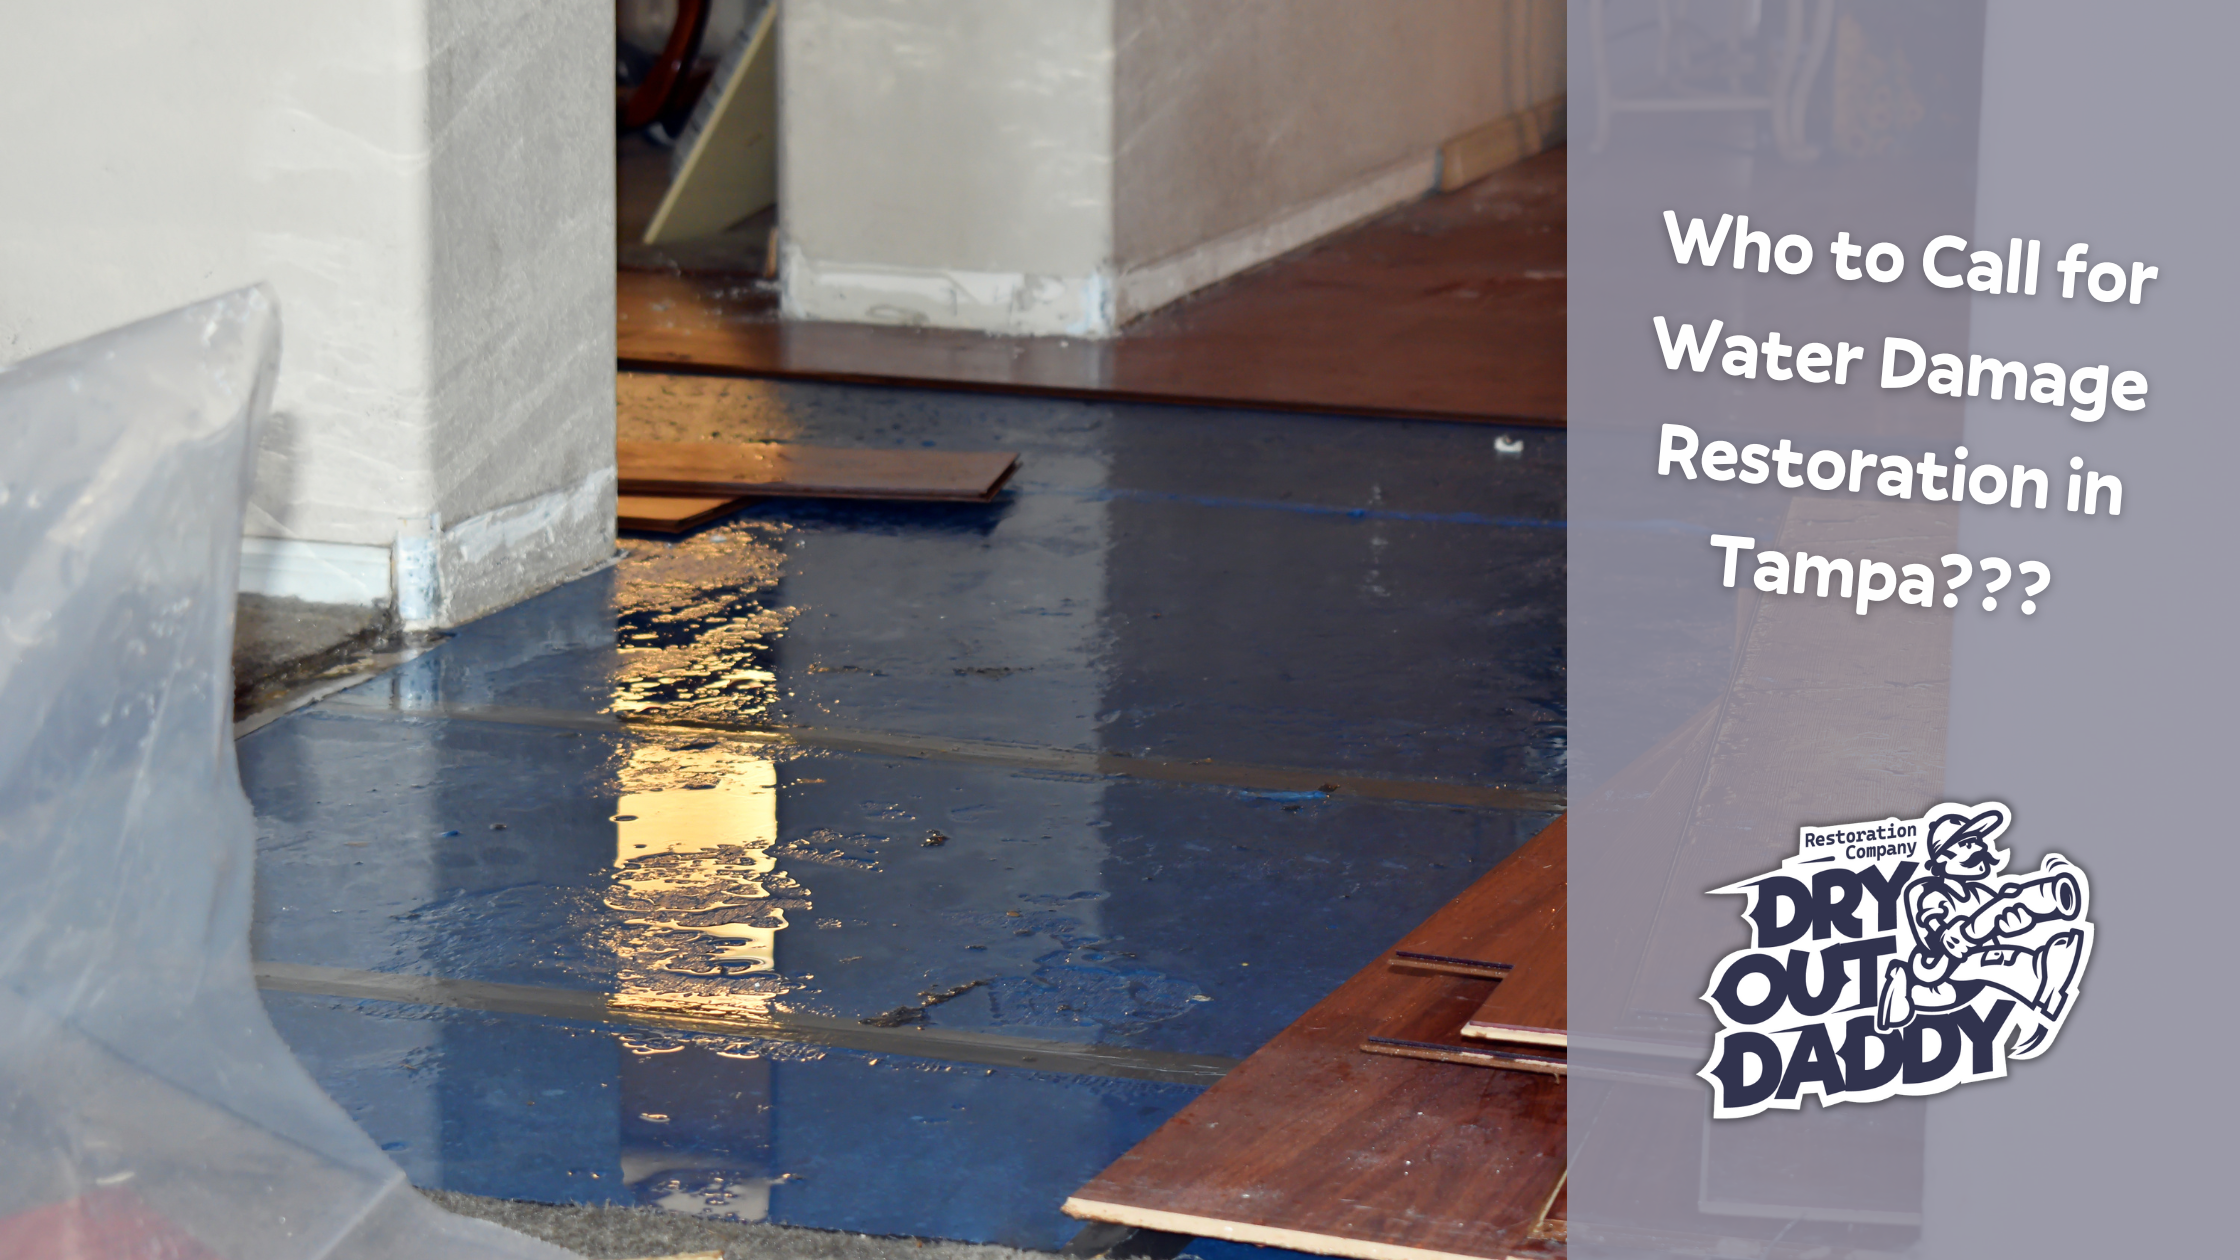 Who to Call for Water Damage Restoration in Tampa